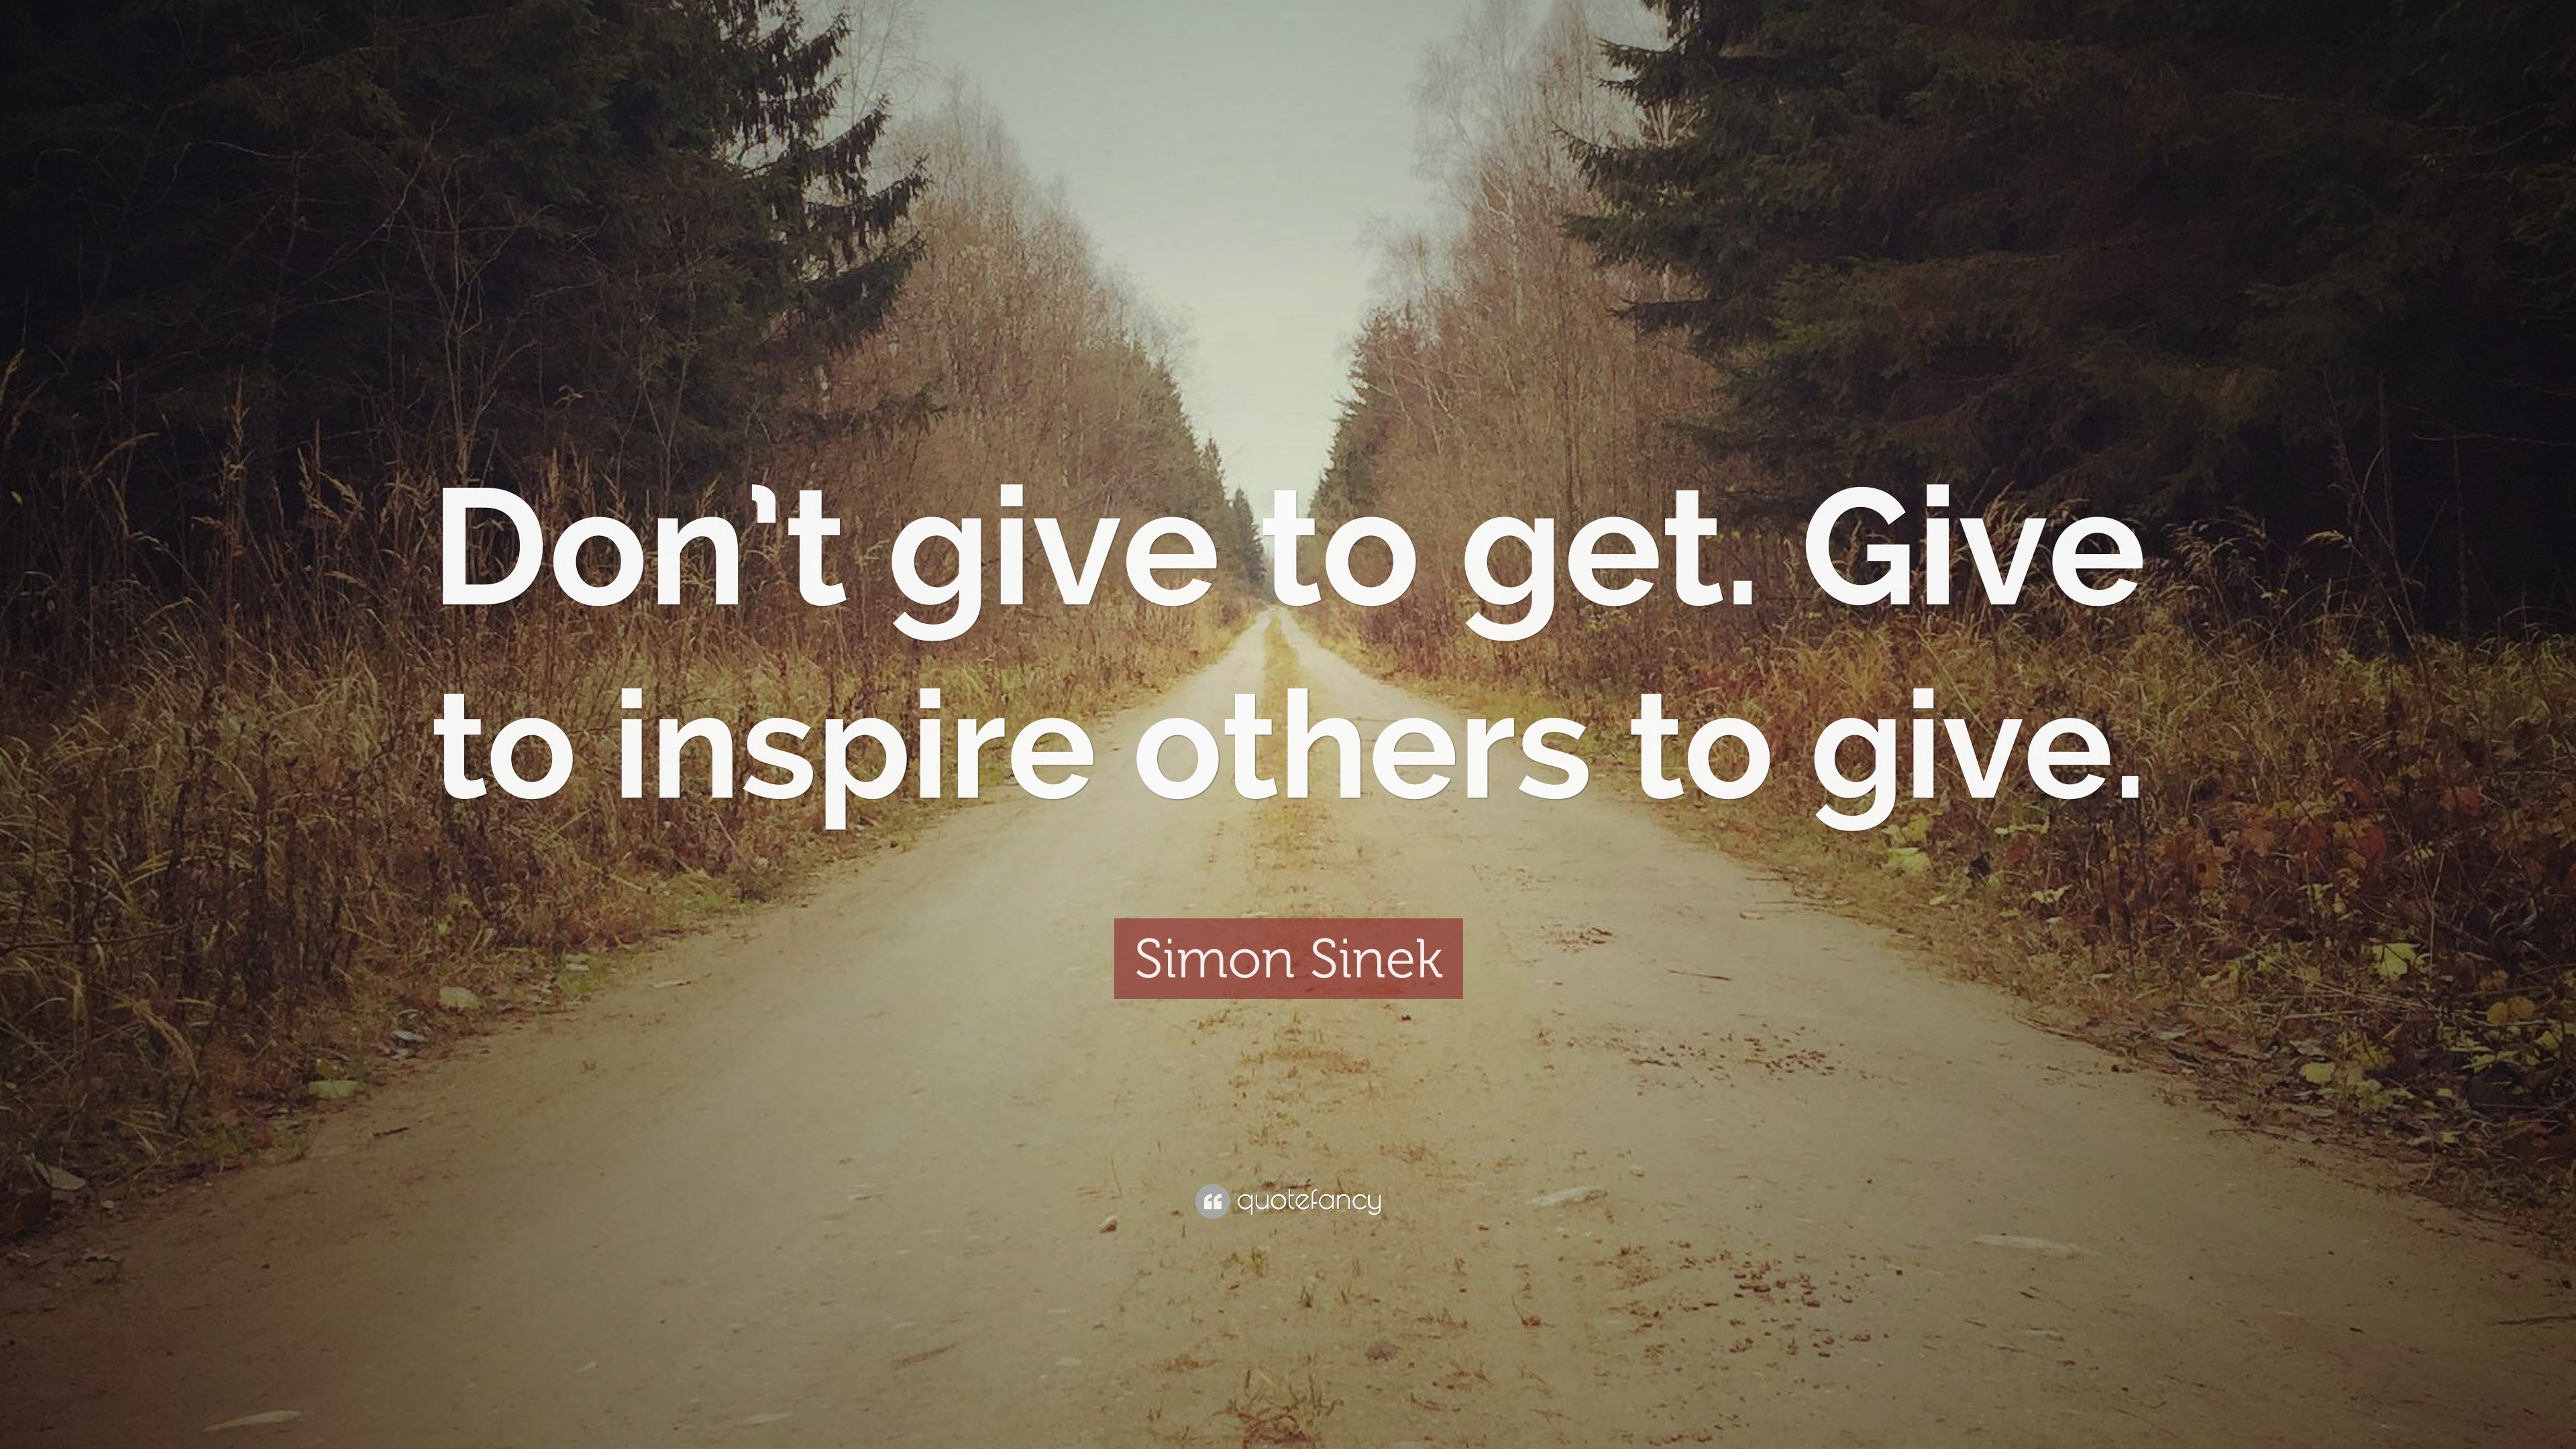 Simon Sinek Quote “Don’t give to get. Give to inspire